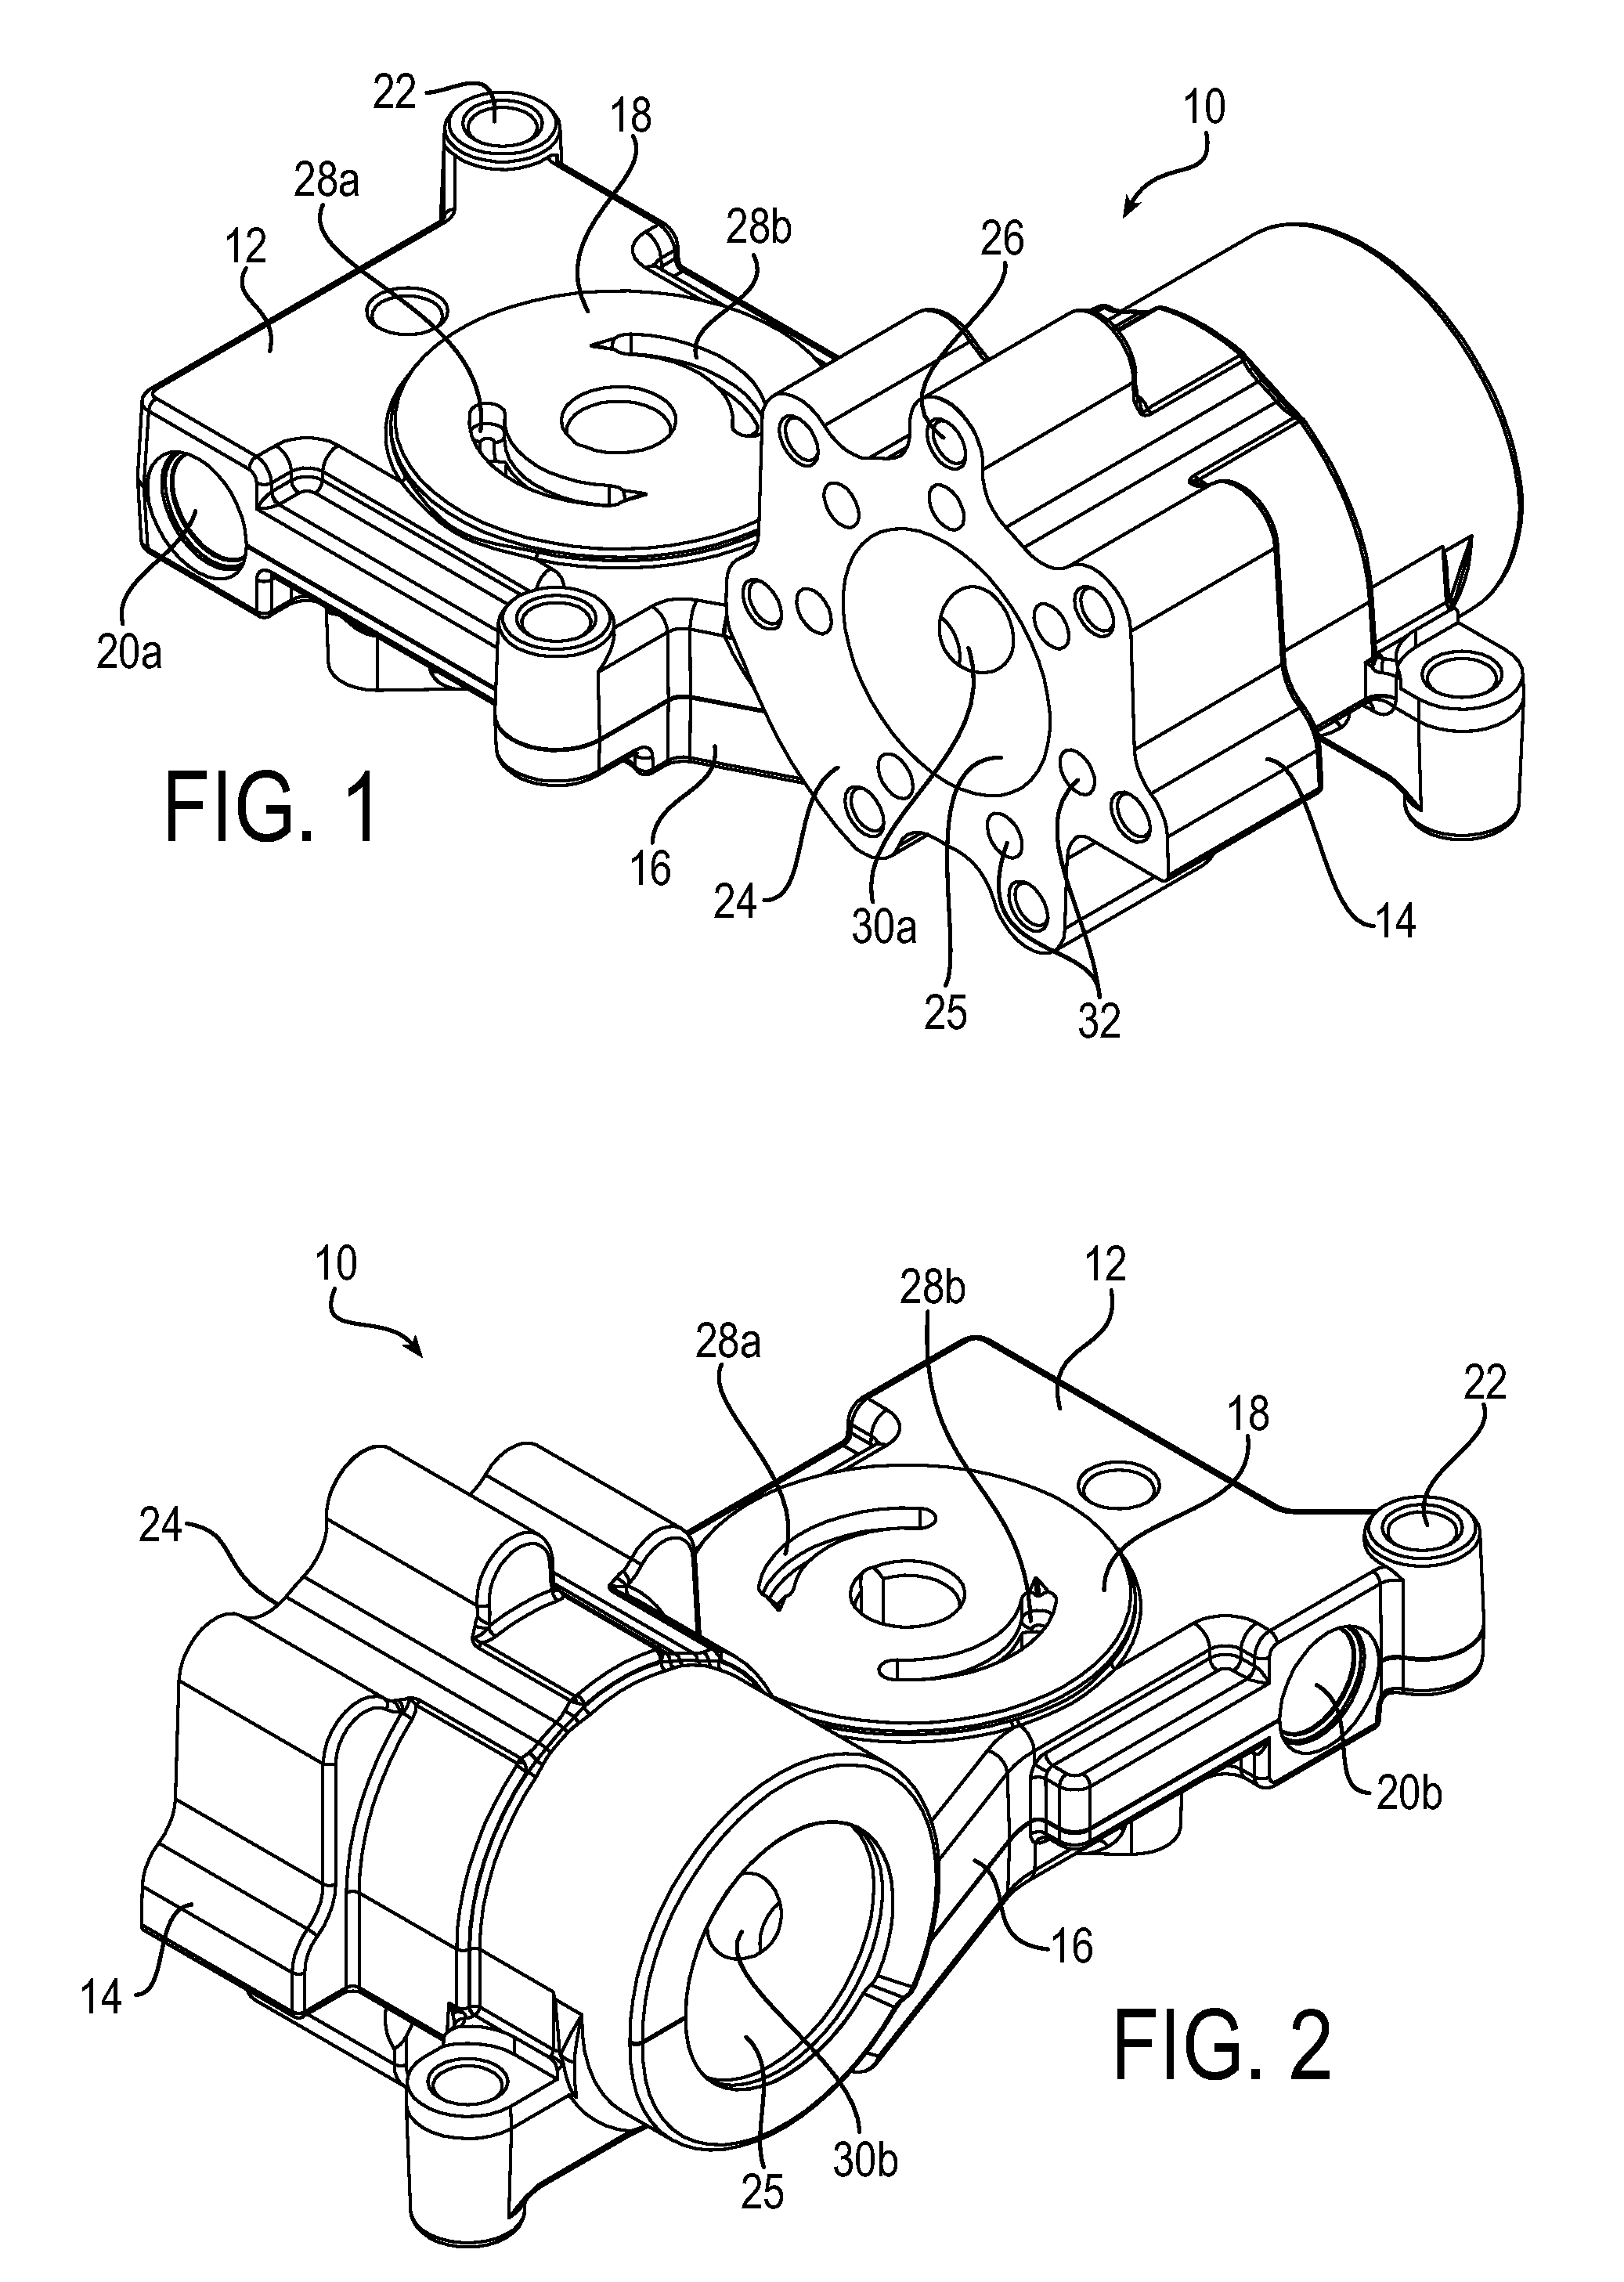 Hydrostatic transmission with spool valve driven motor